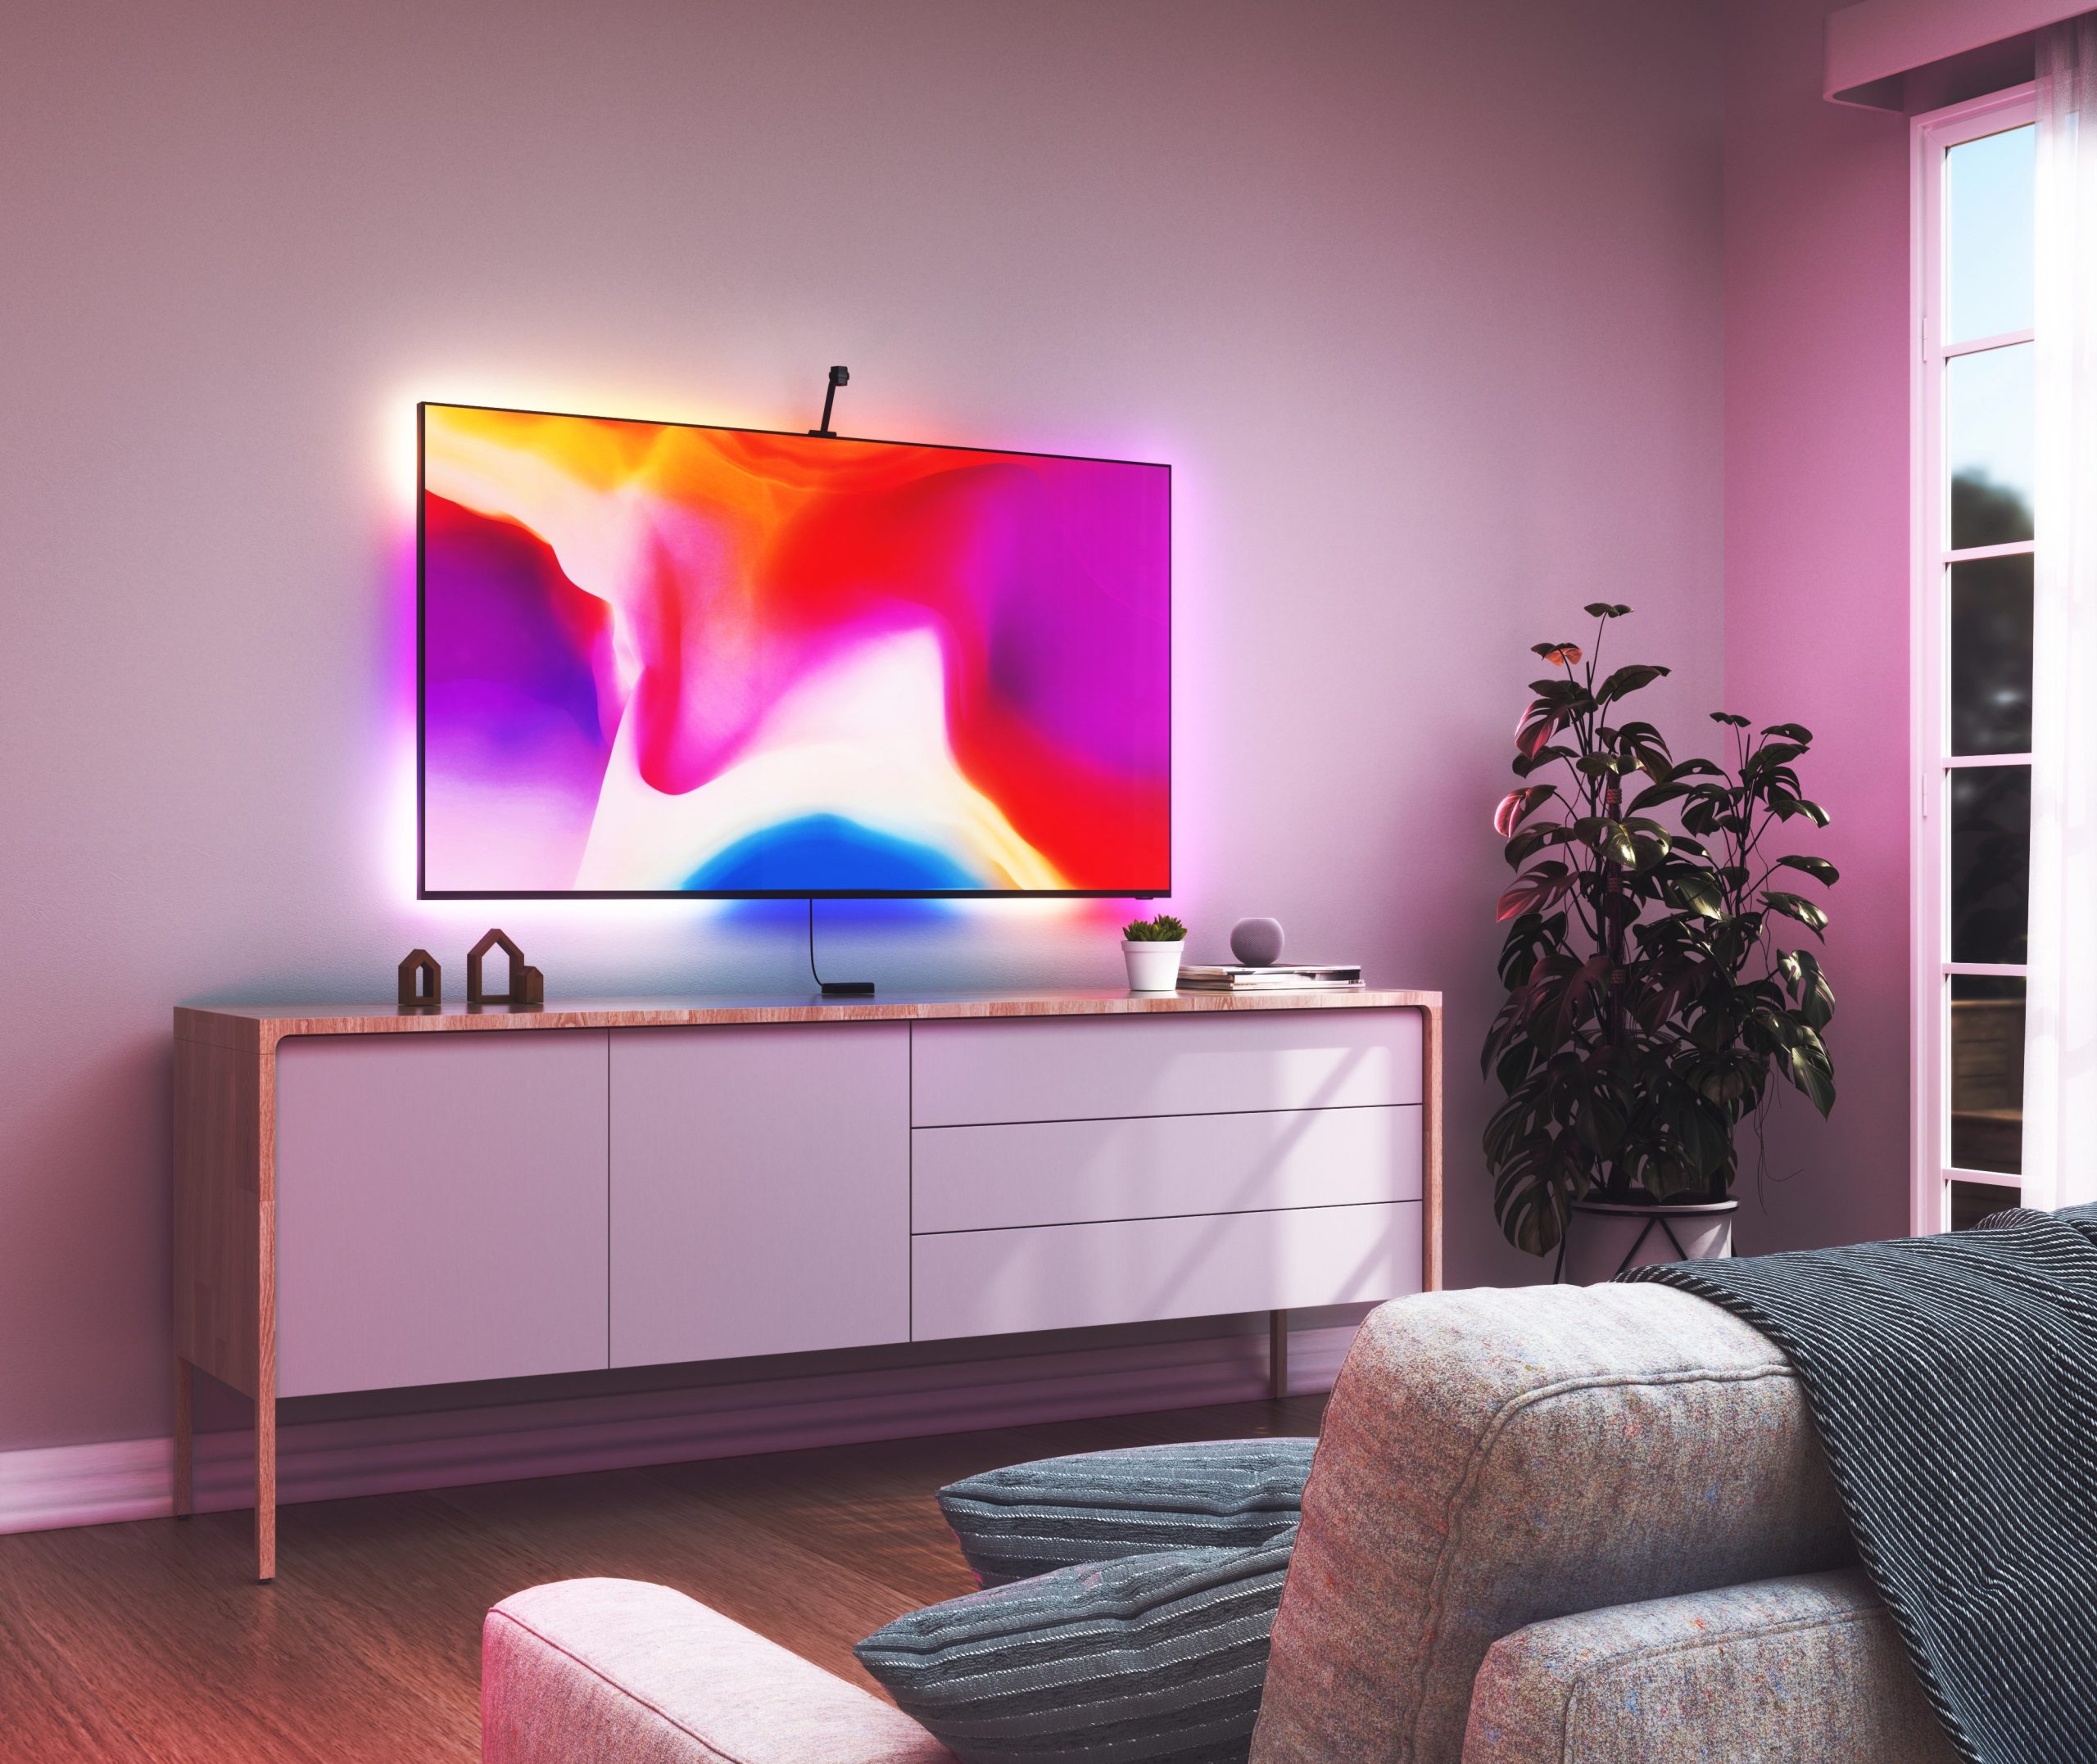 Nanoleaf announces new smart lighting for TVs, ceilings, and self-learning smart switches. – Smartprix